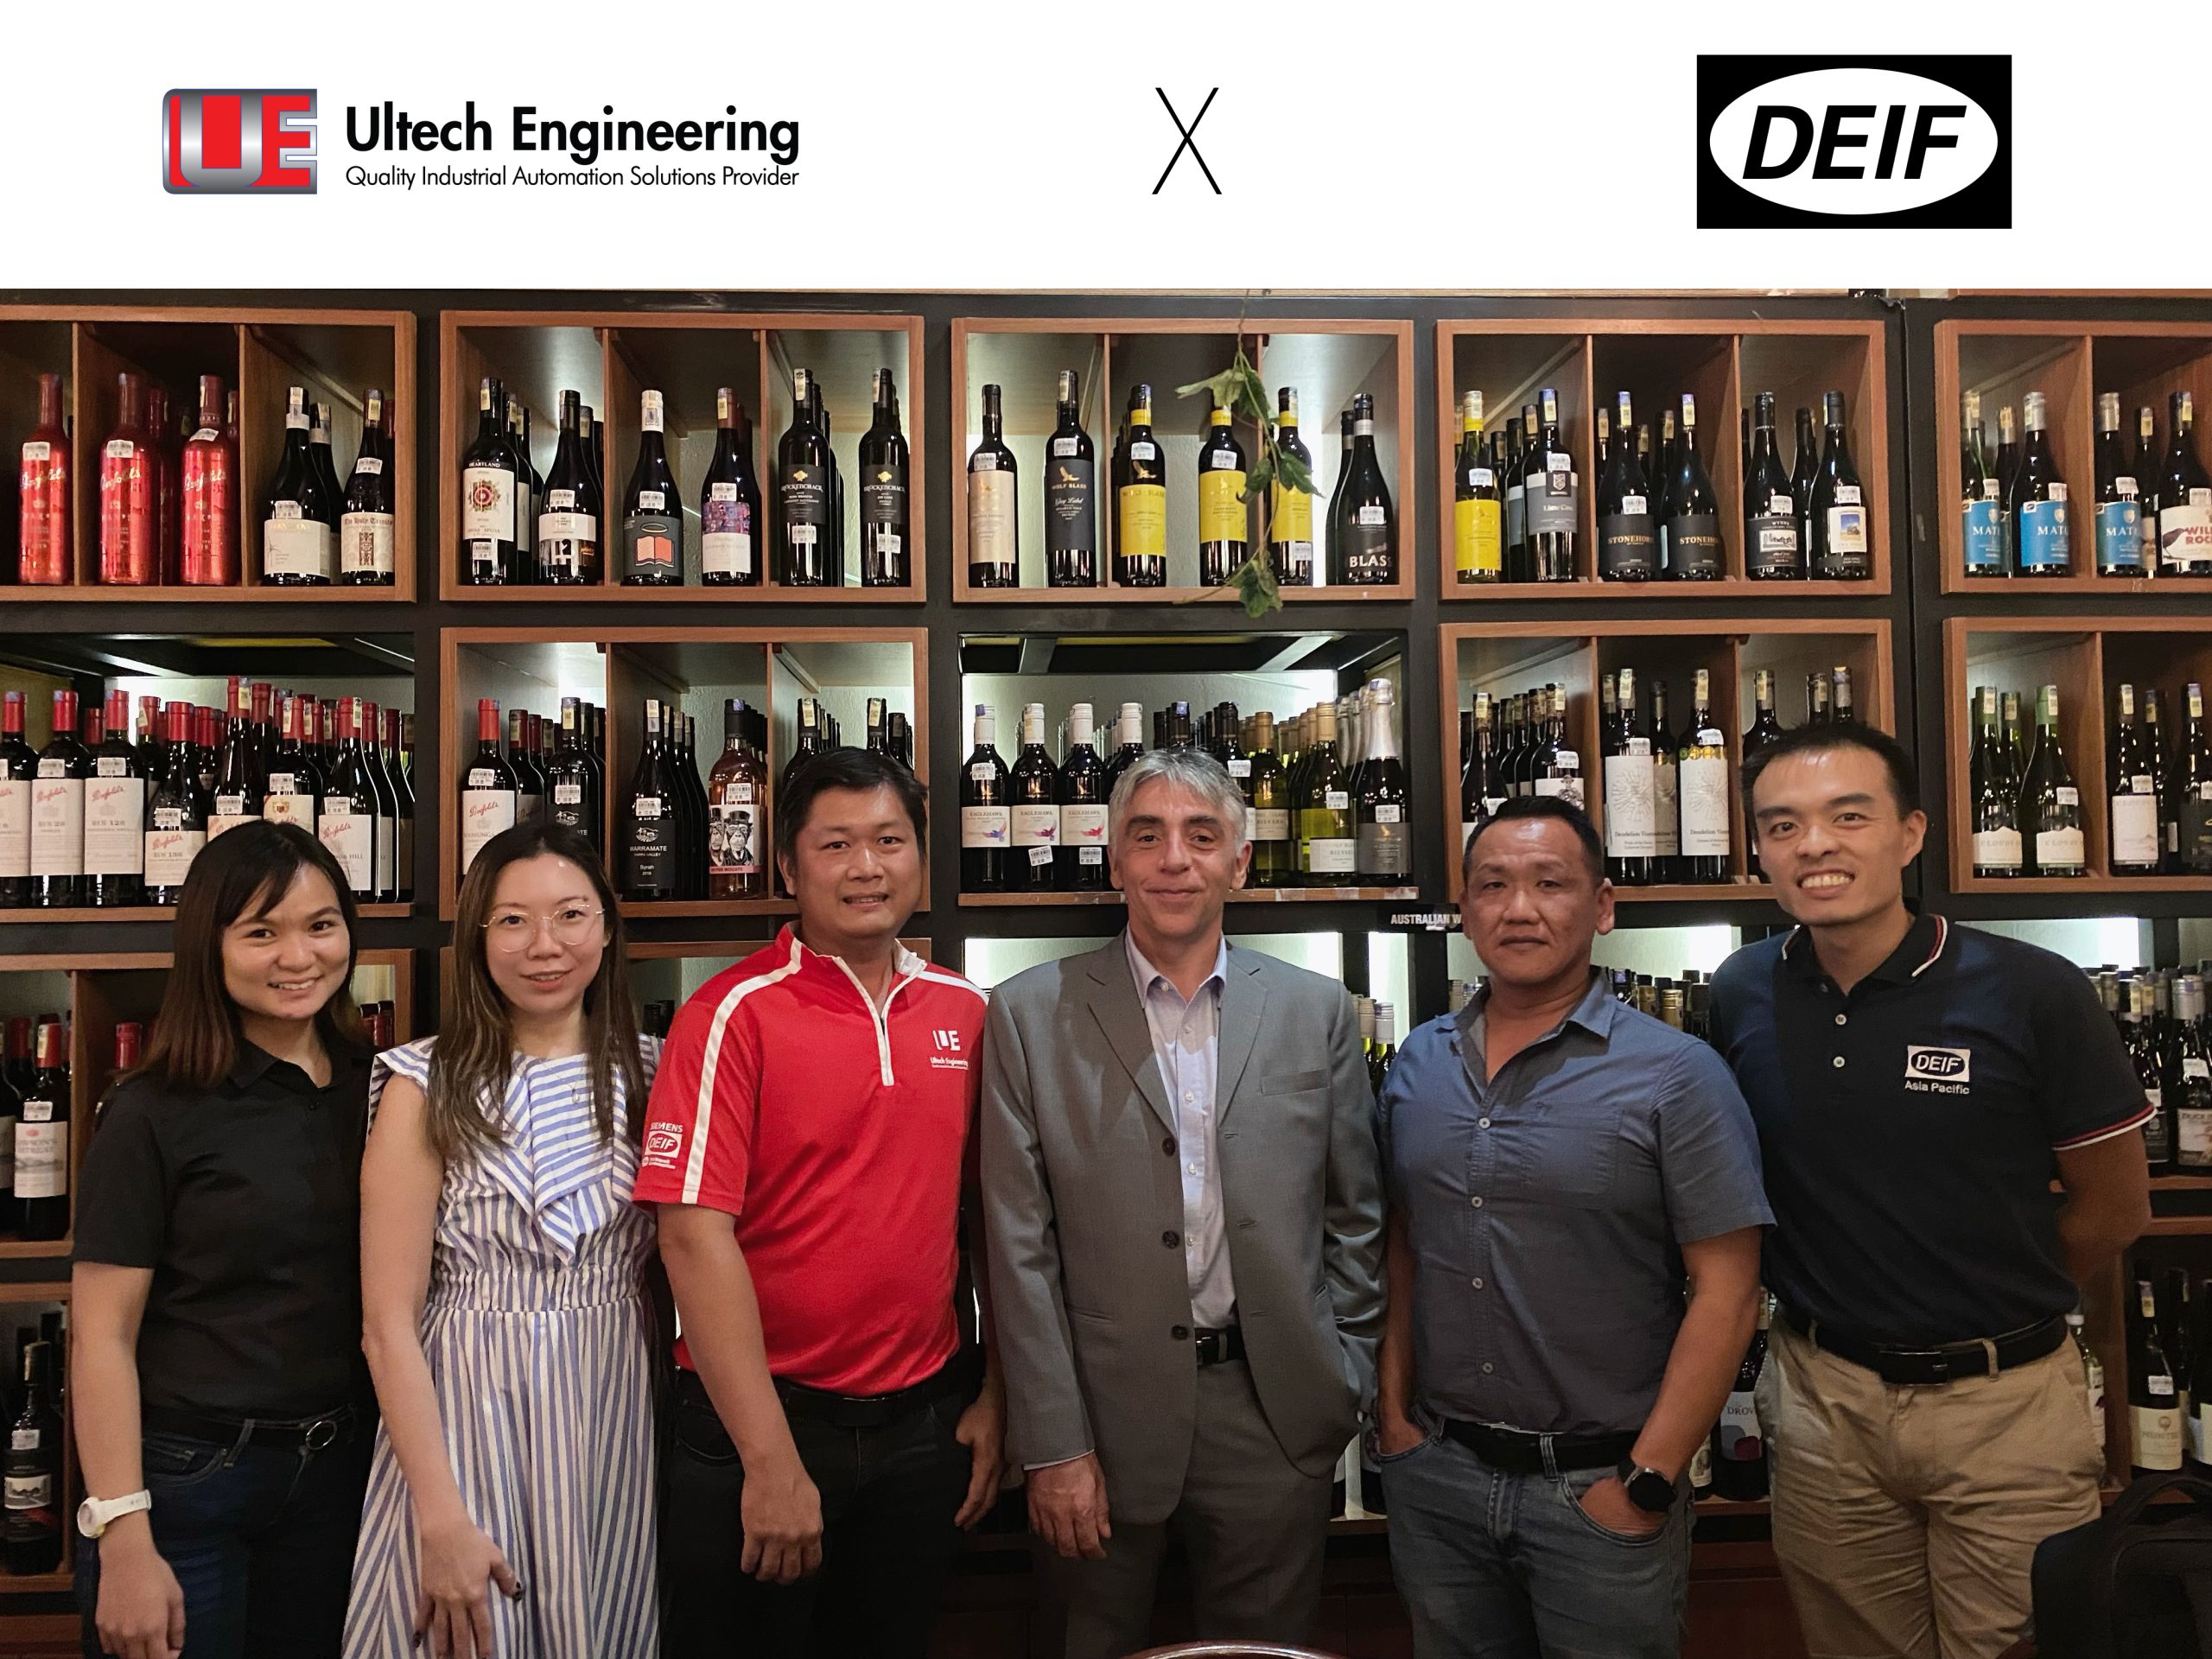 Ultech Engineering and DEIF Partnership to Revolutionize the Energy Industry